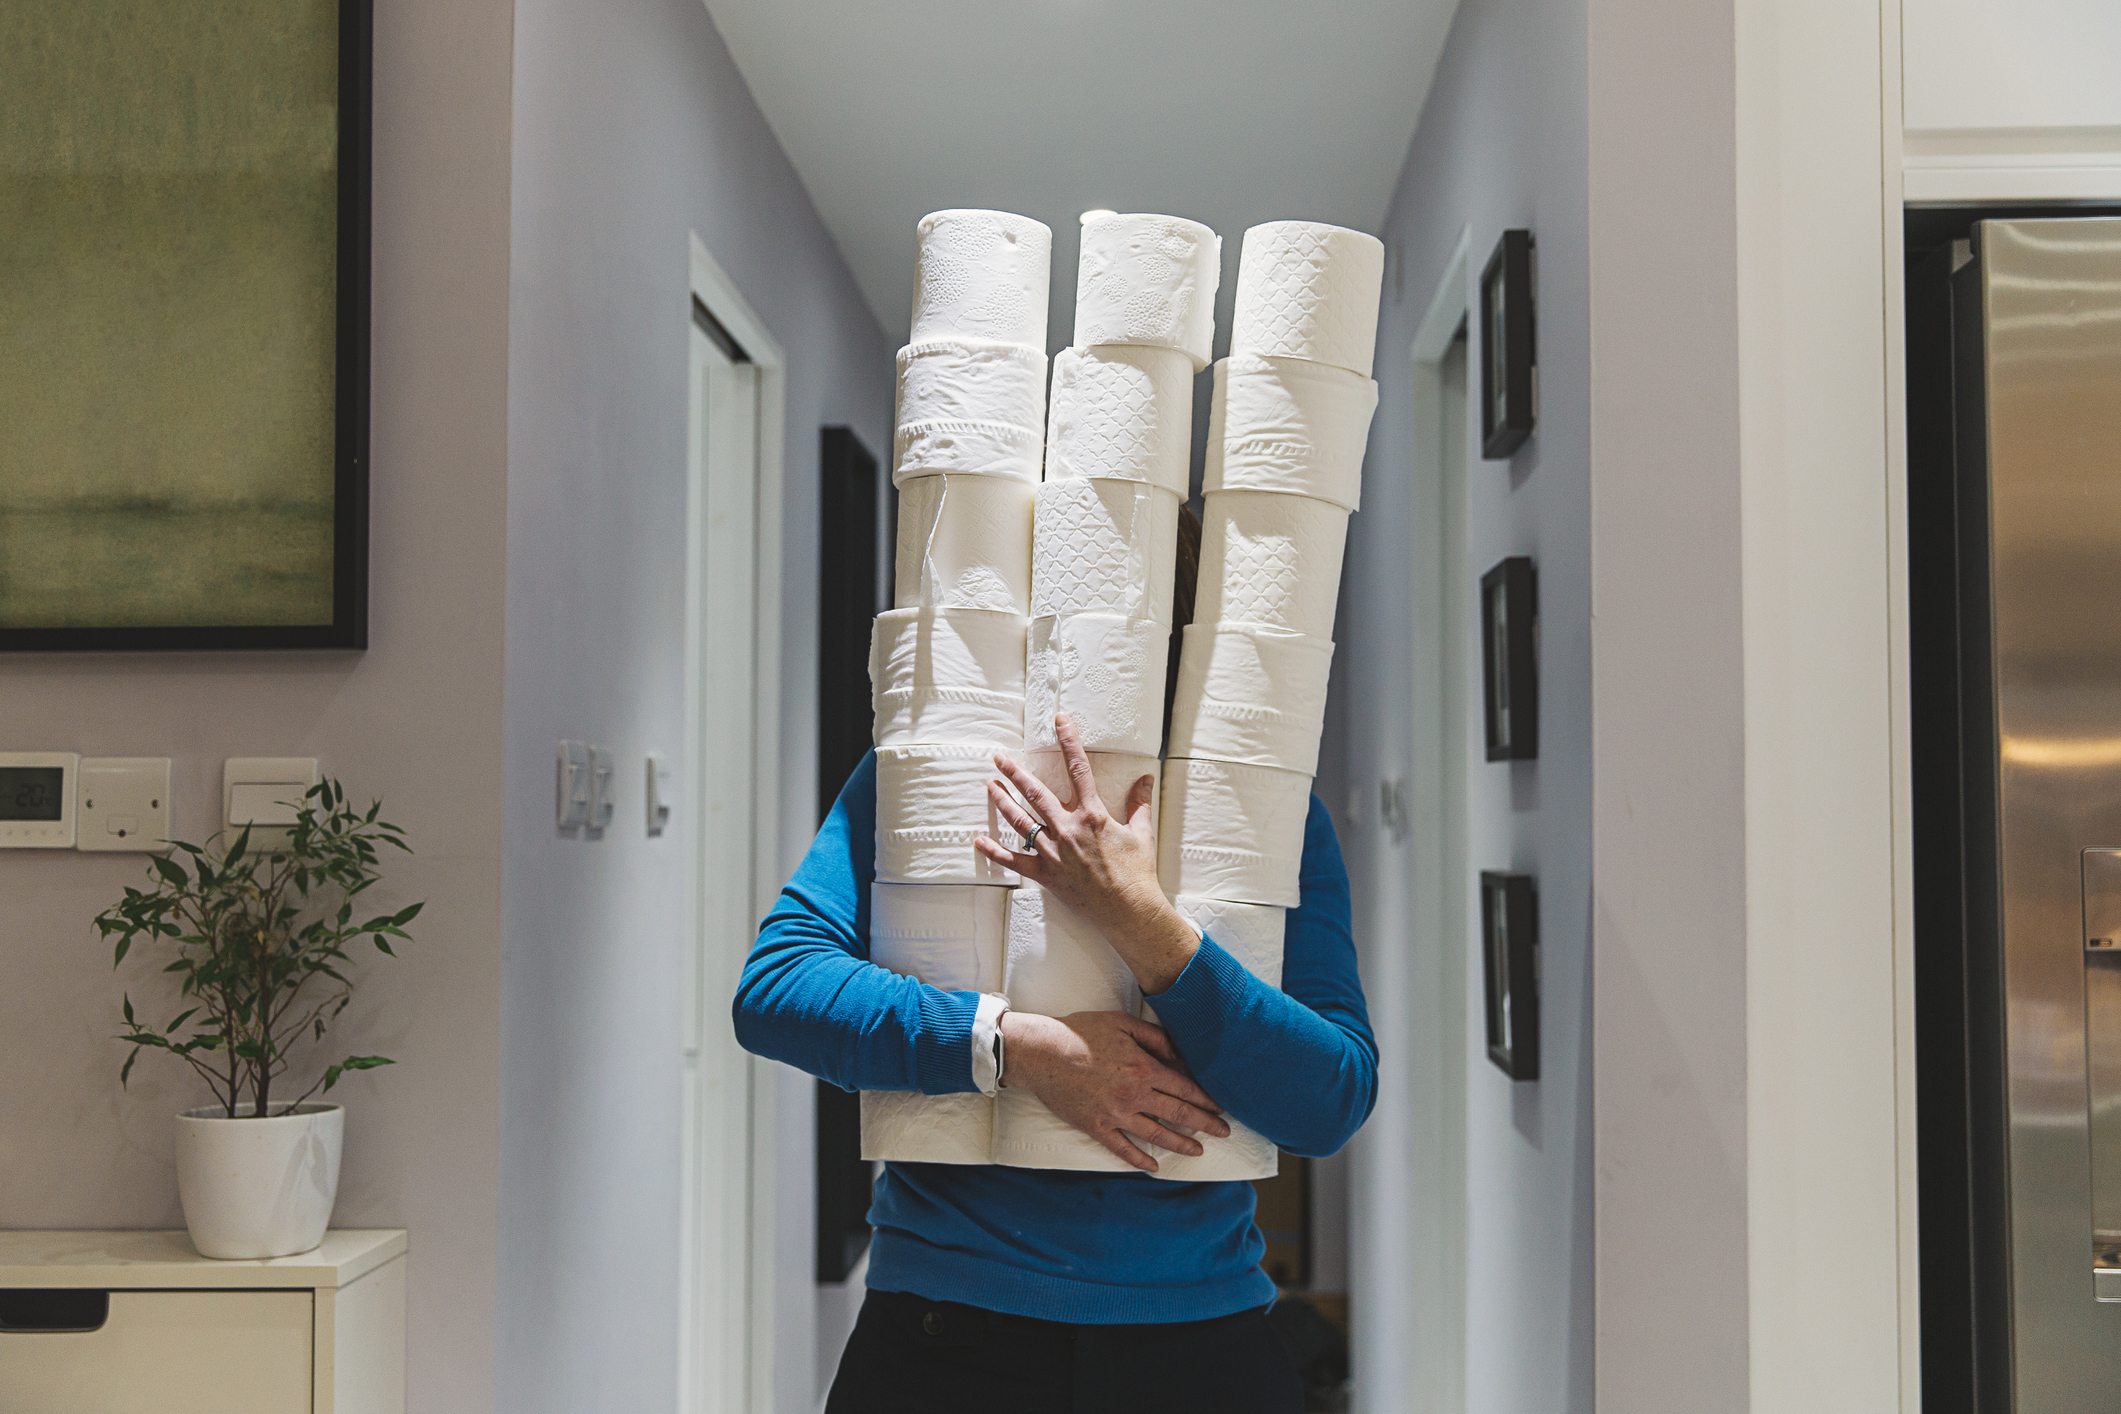 A person is holding a tower of toilet paper